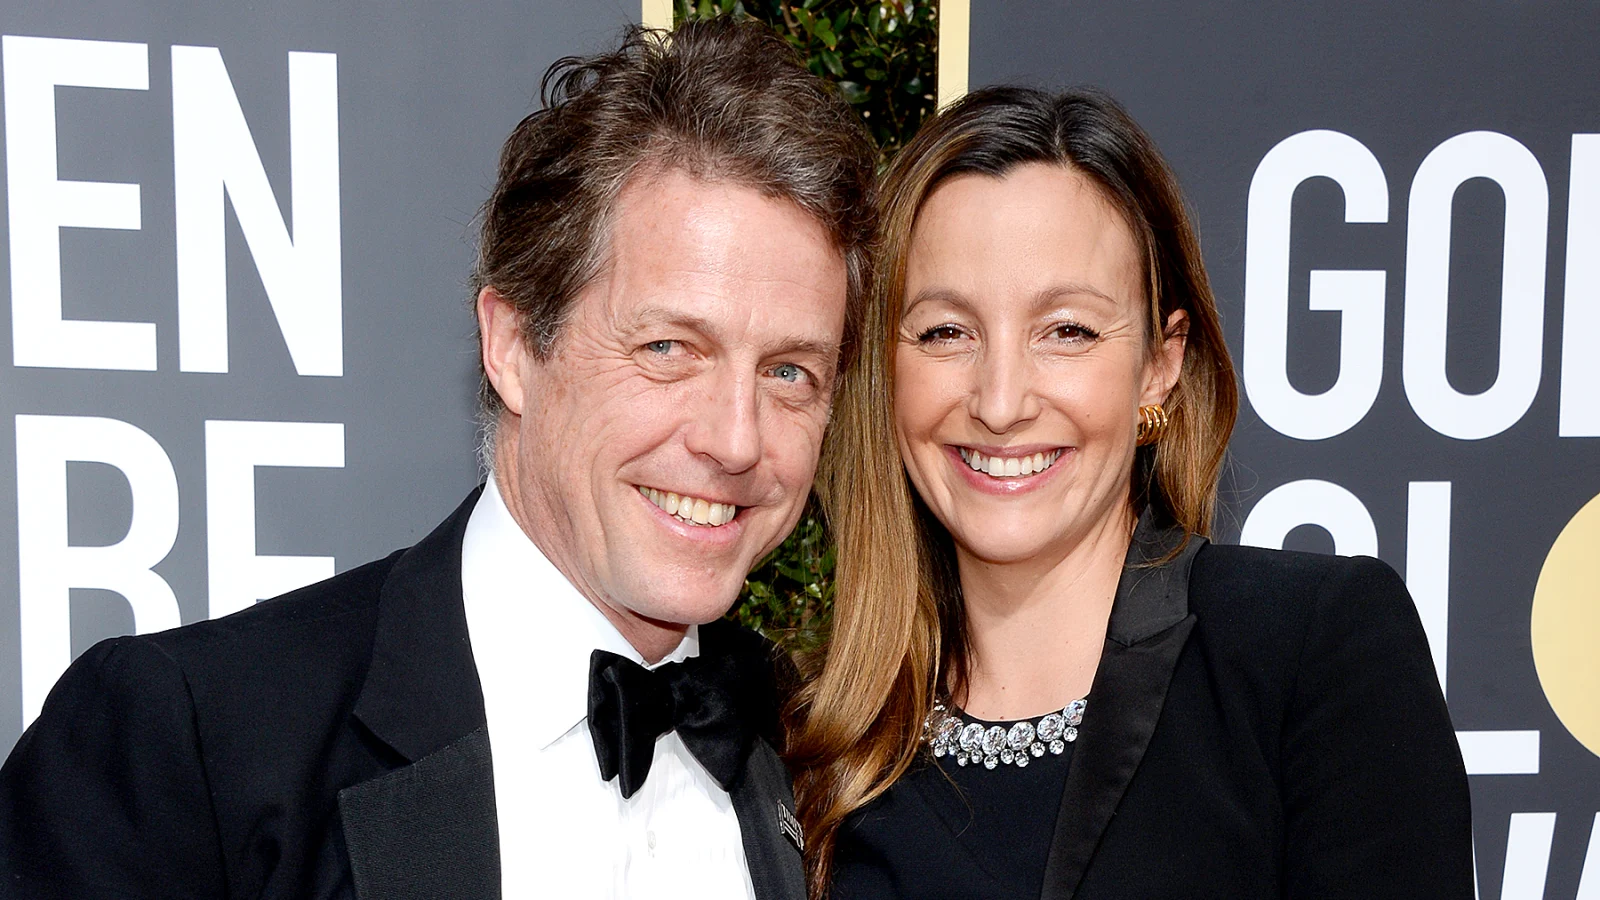 Hugh Grant and his wife Anna Eberstein (Credits: Us Weekly)